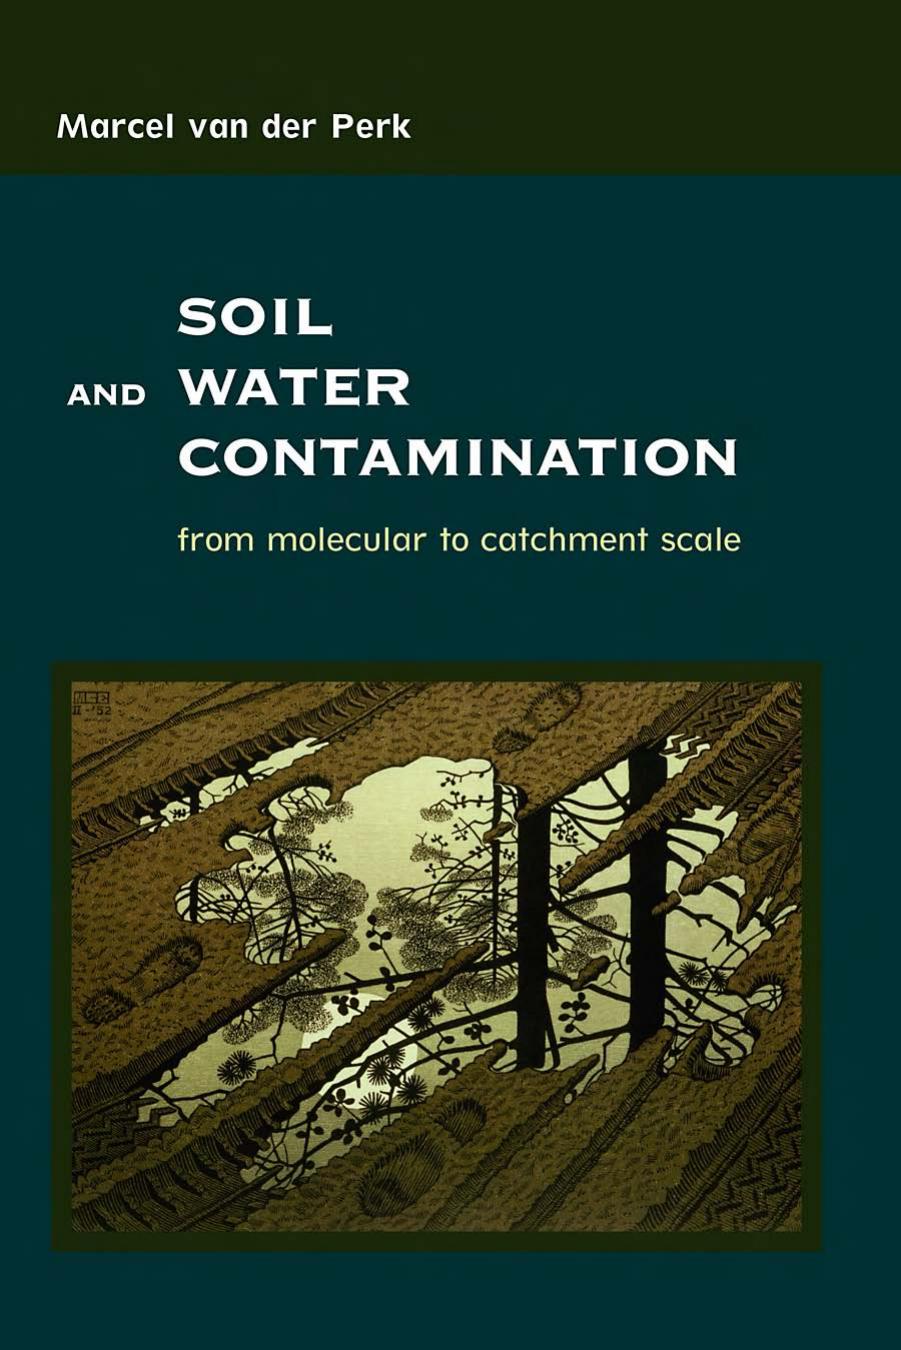 Soil and Water Contamination: From Molecular to Catchment Scale